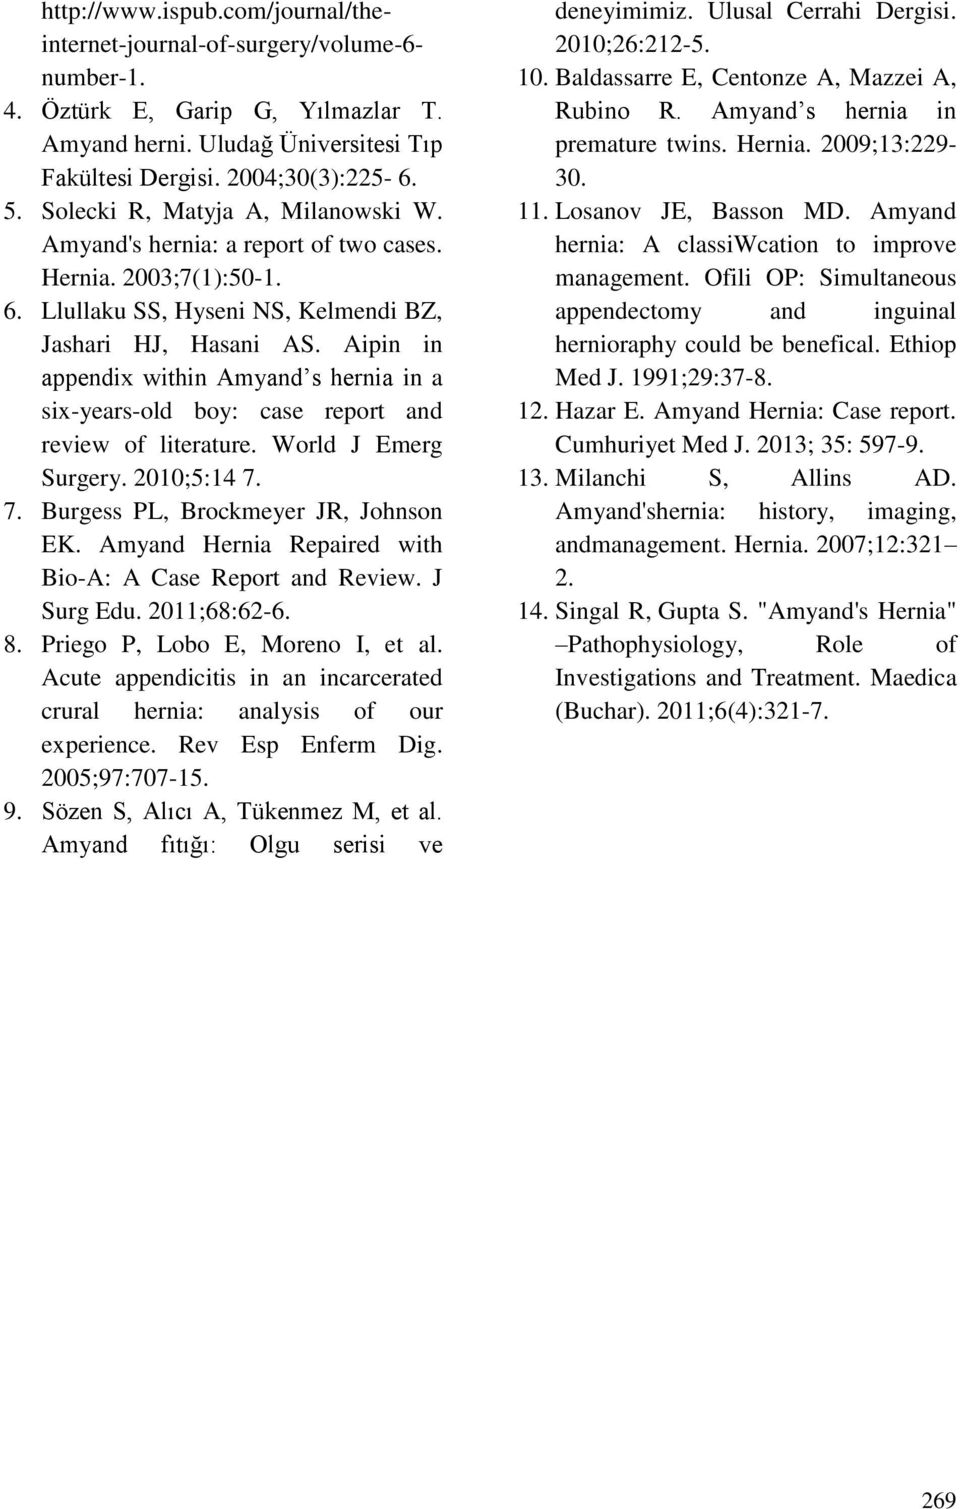 Aipin in appendix within Amyand s hernia in a six-years-old boy: case report and review of literature. World J Emerg Surgery. 2010;5:14 7. 7. Burgess PL, Brockmeyer JR, Johnson EK.